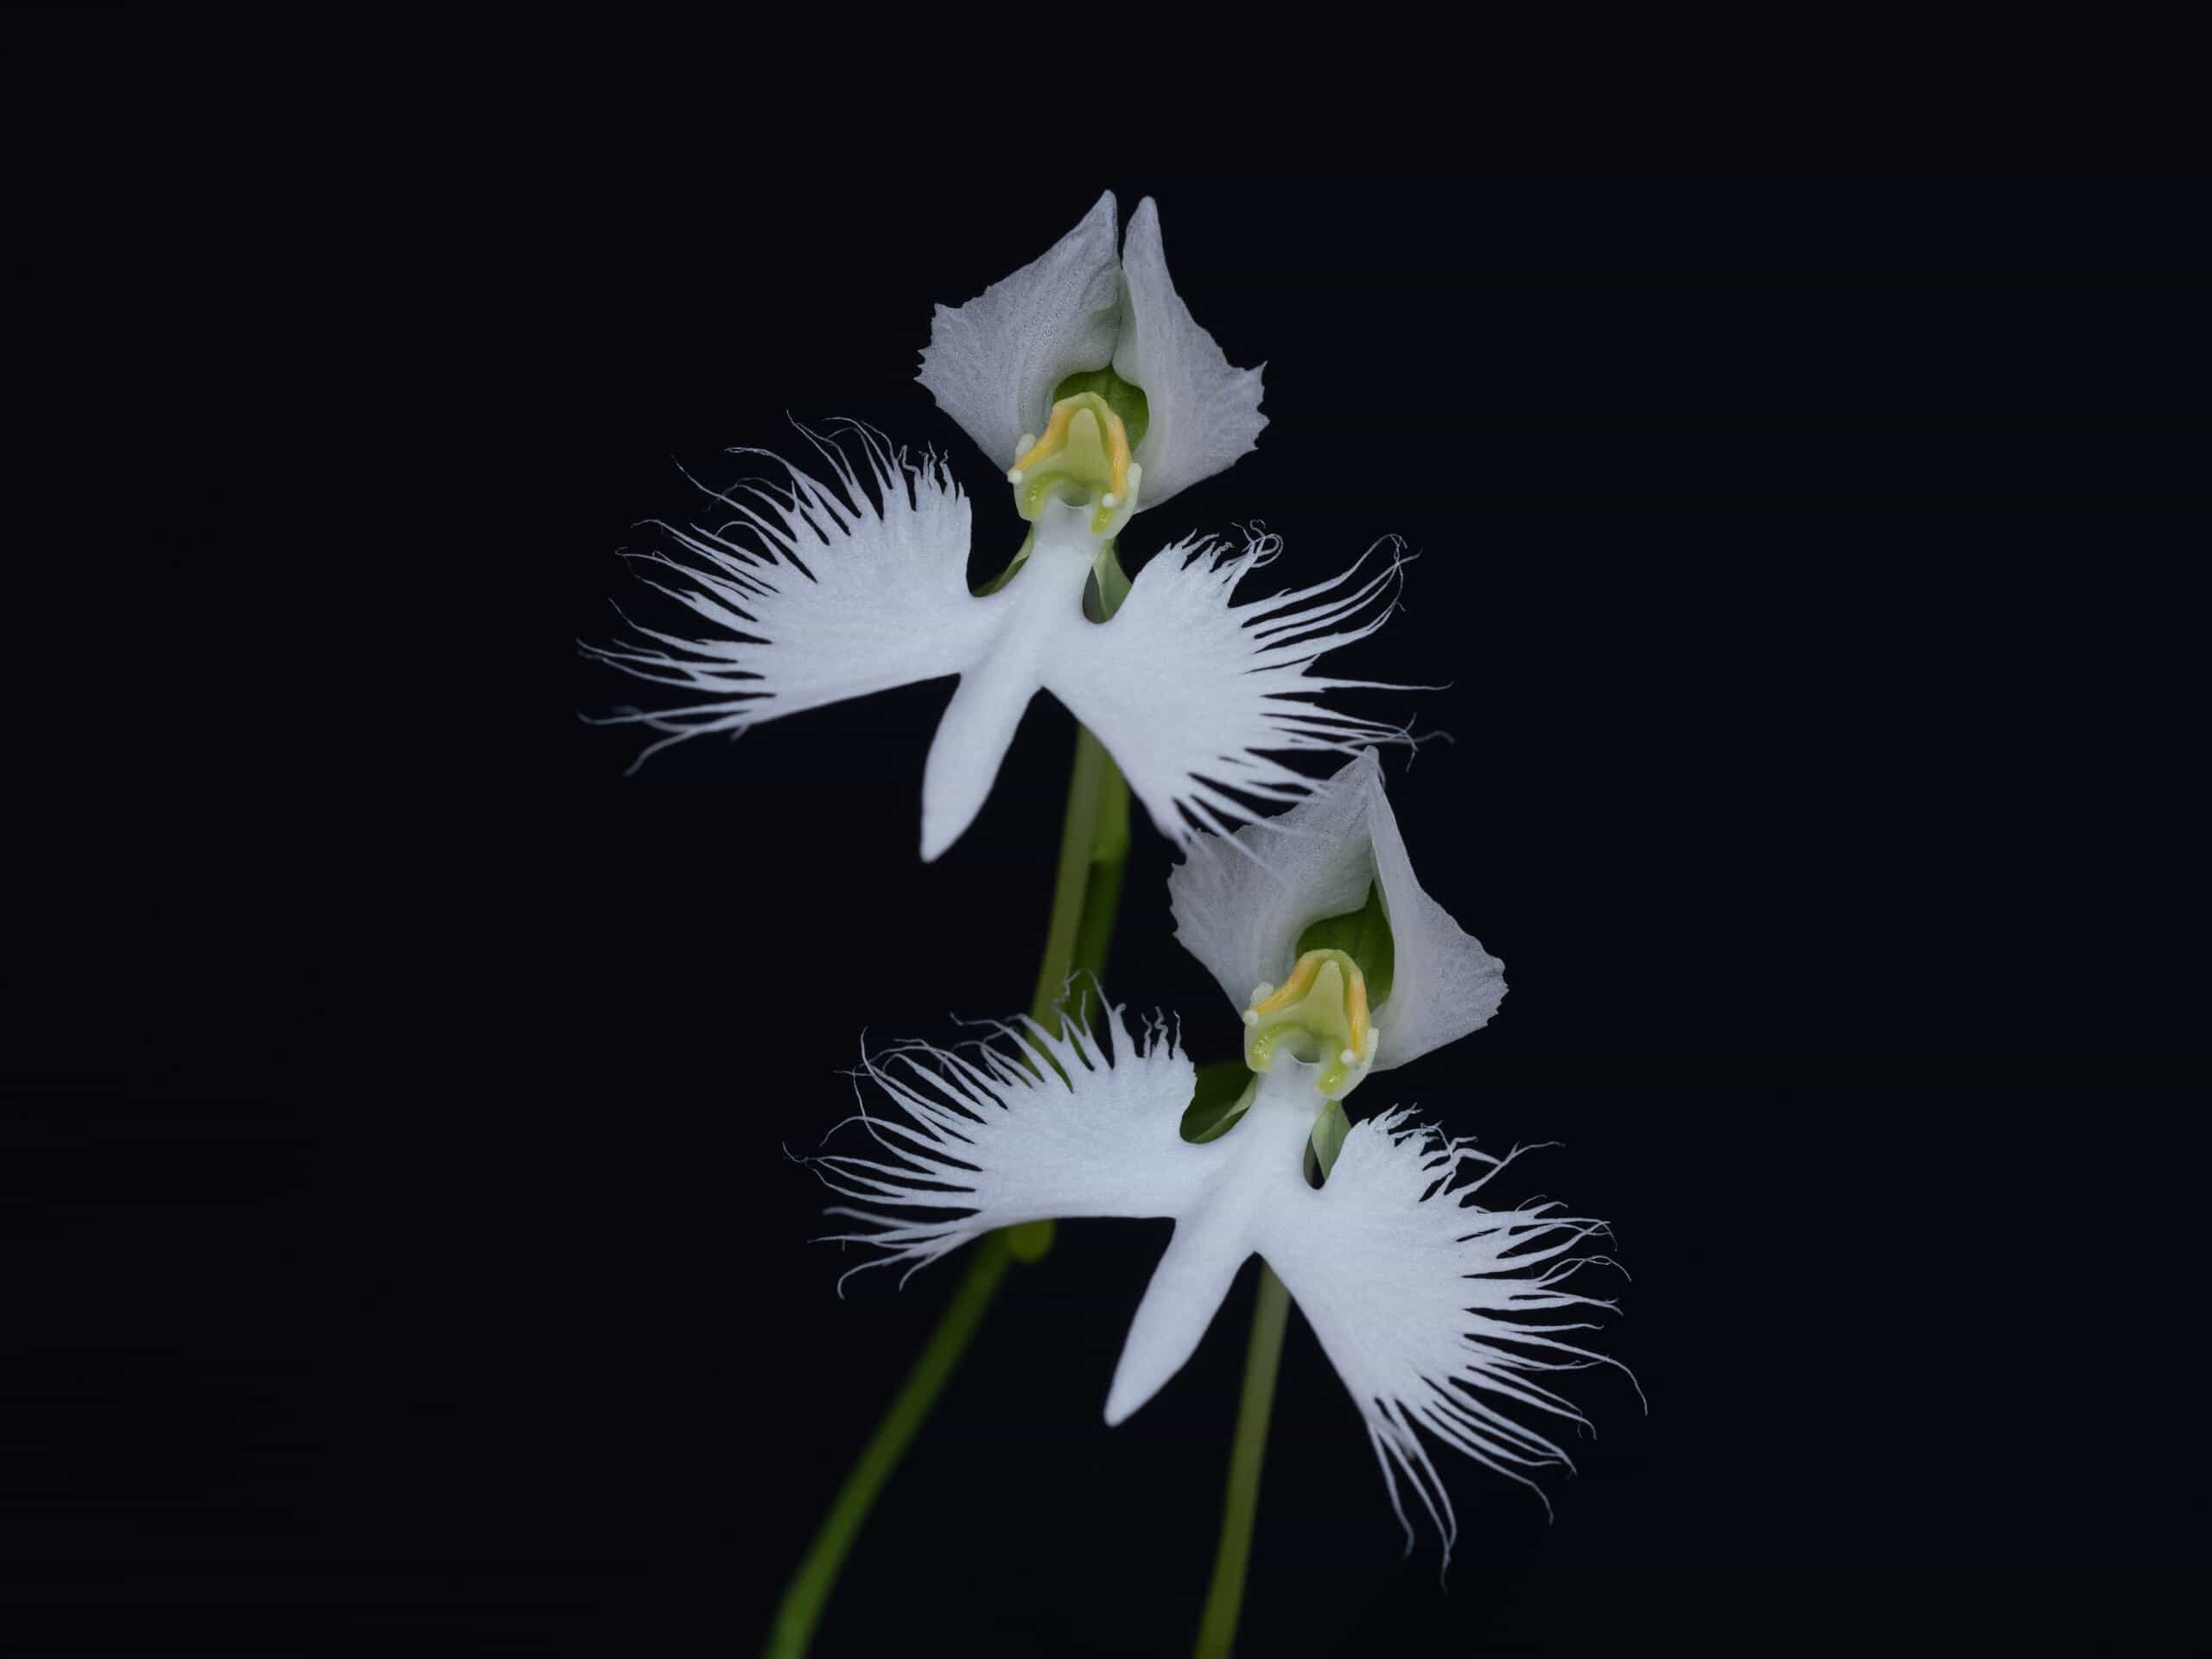 White egret flowers viewed from above